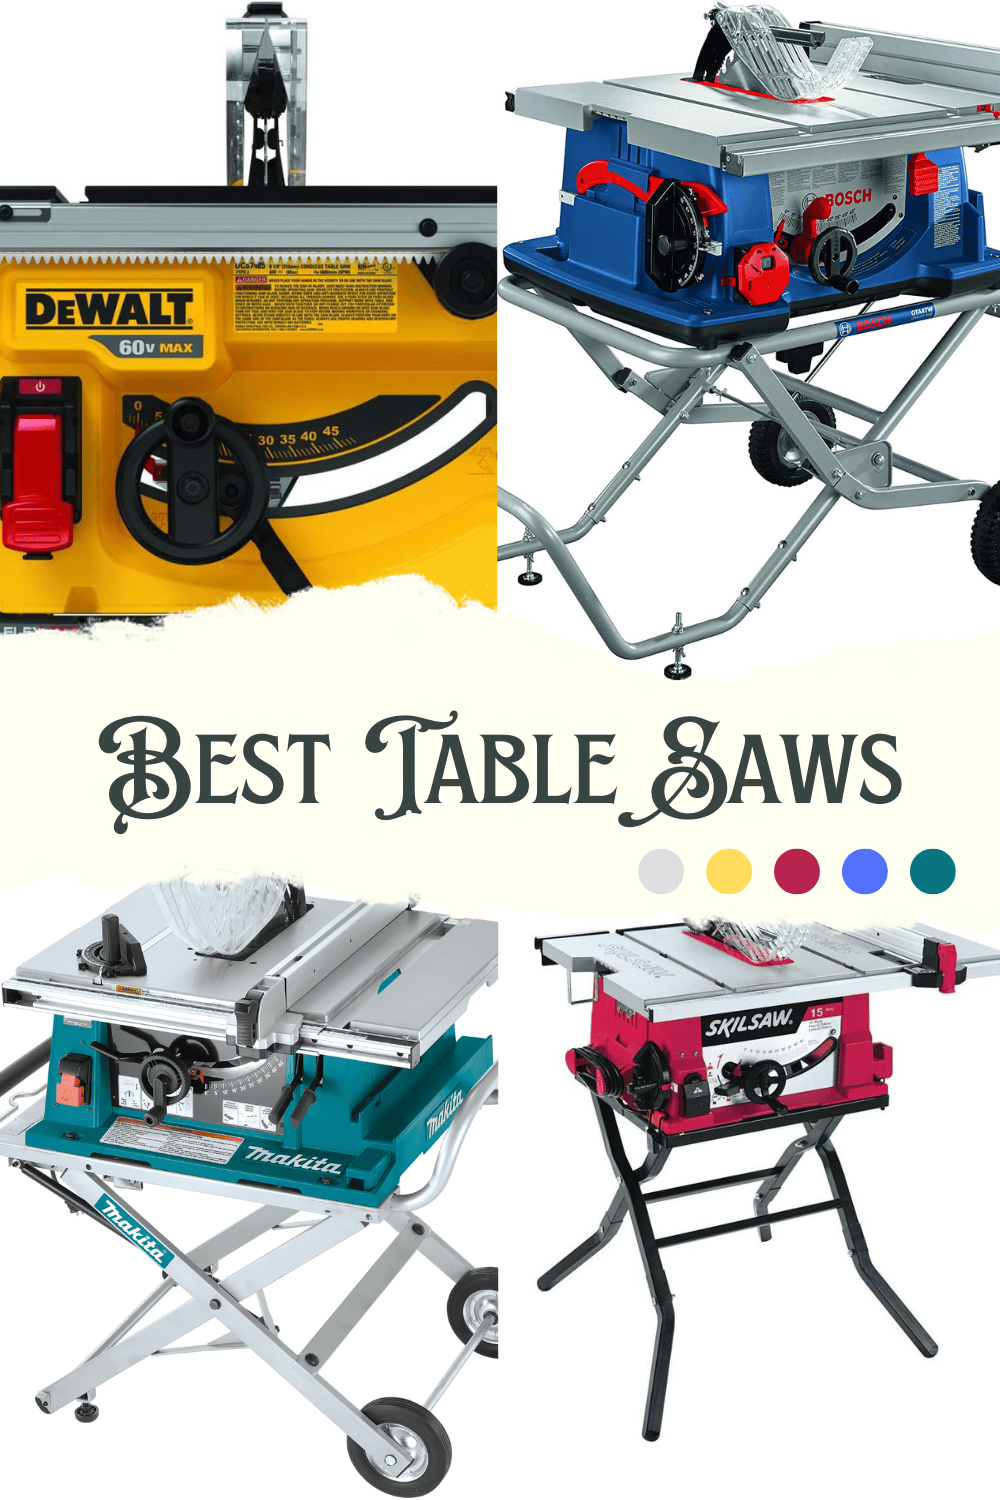 Your Guide to Choosing the best portable table saw for fine woodworking